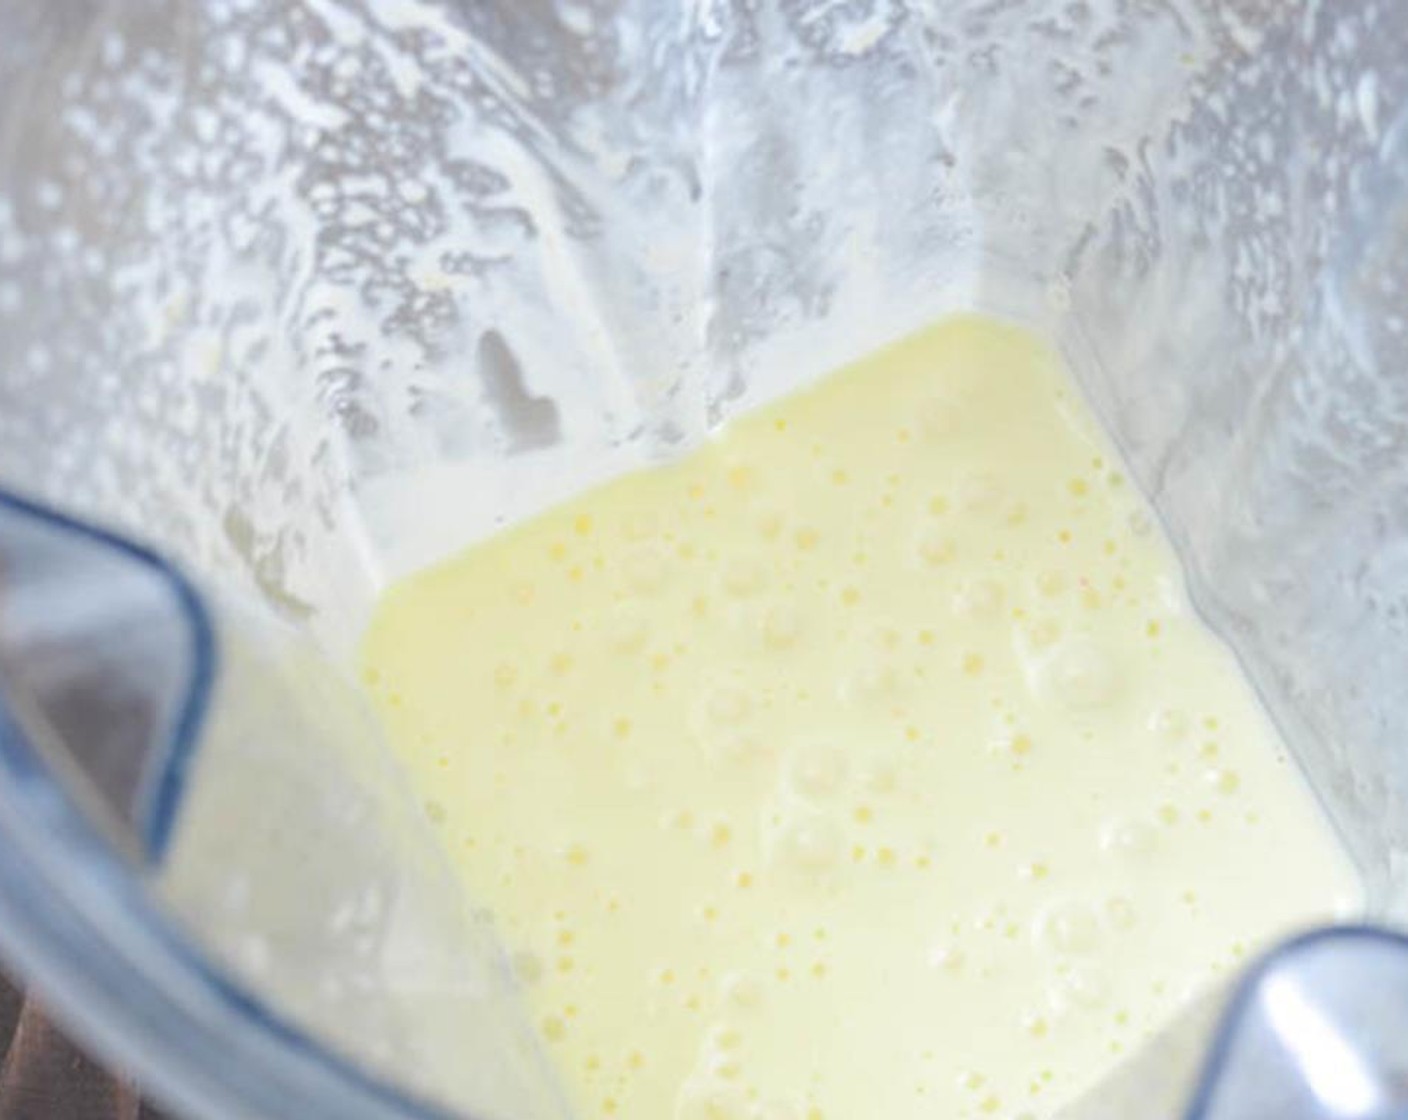 step 2 On medium high speed add the remaining 2/3 cup of Vegetable Oil (2/3 cup) in a slow drizzle through the top opening of the blender until thick and creamy. Set this "real mayonnaise" mixture aside.